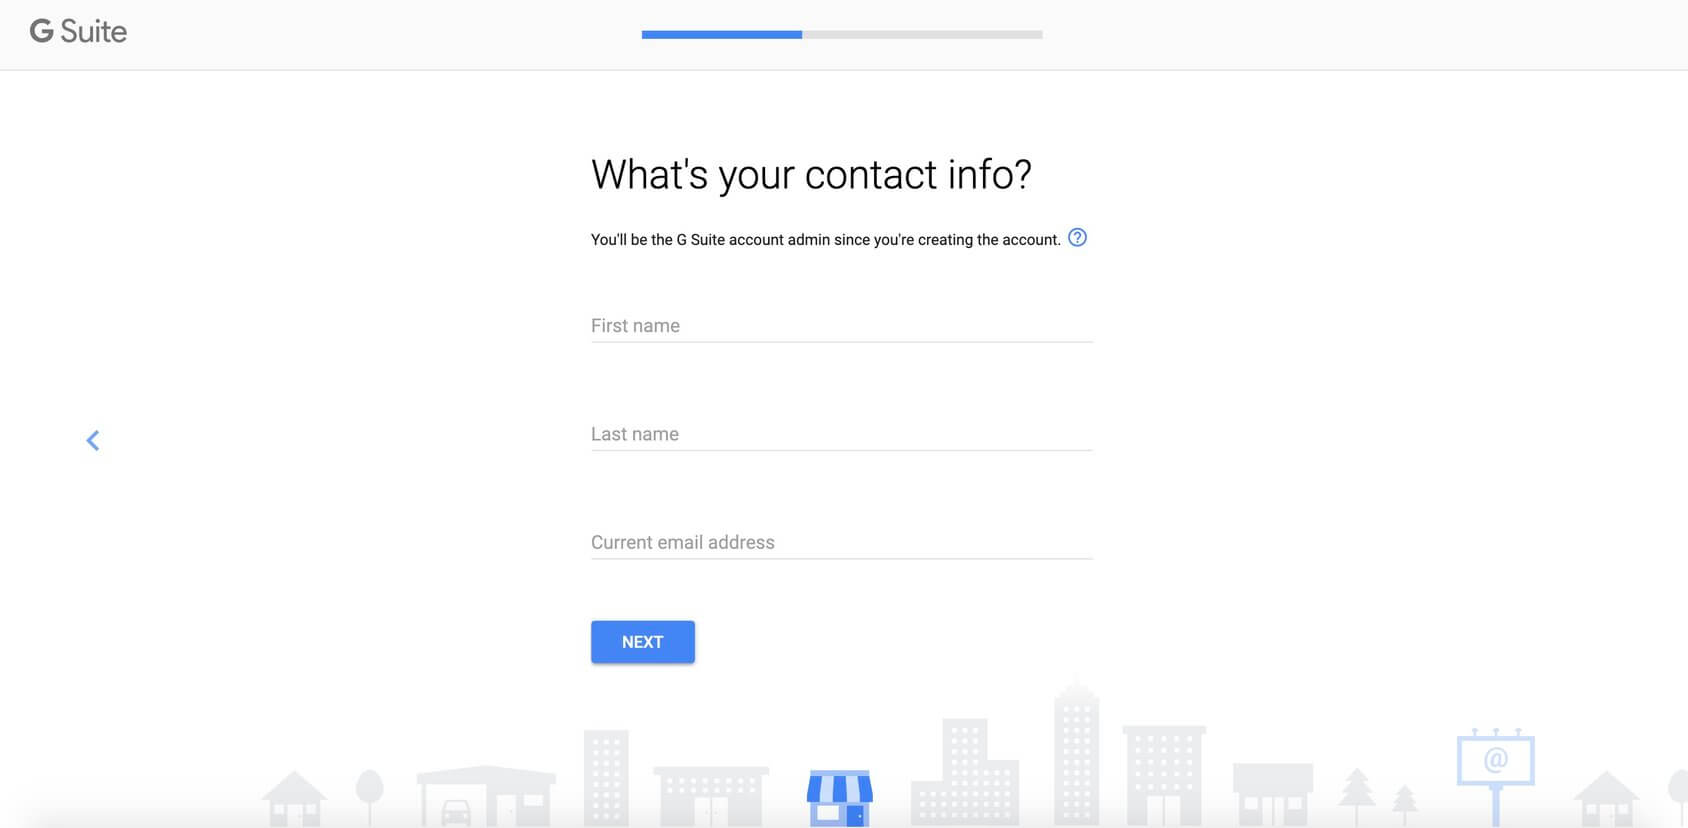 gsuite contact info